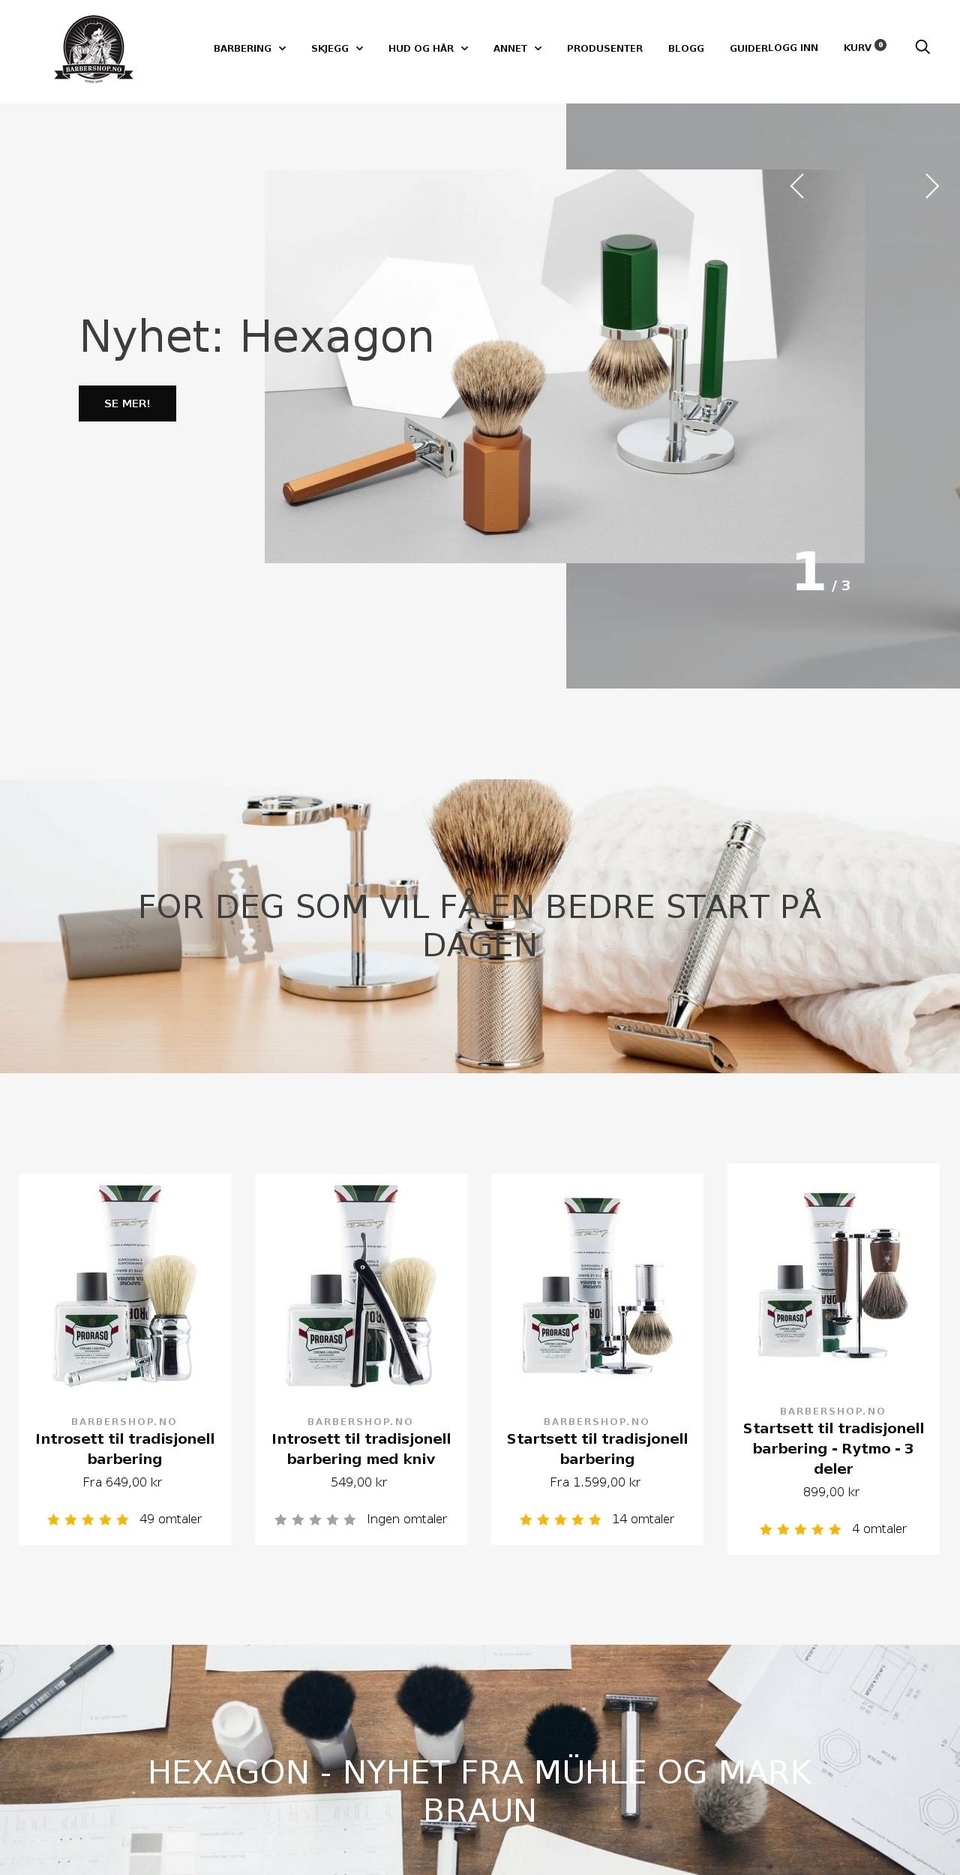 Trademark Shopify theme site example muhle.no